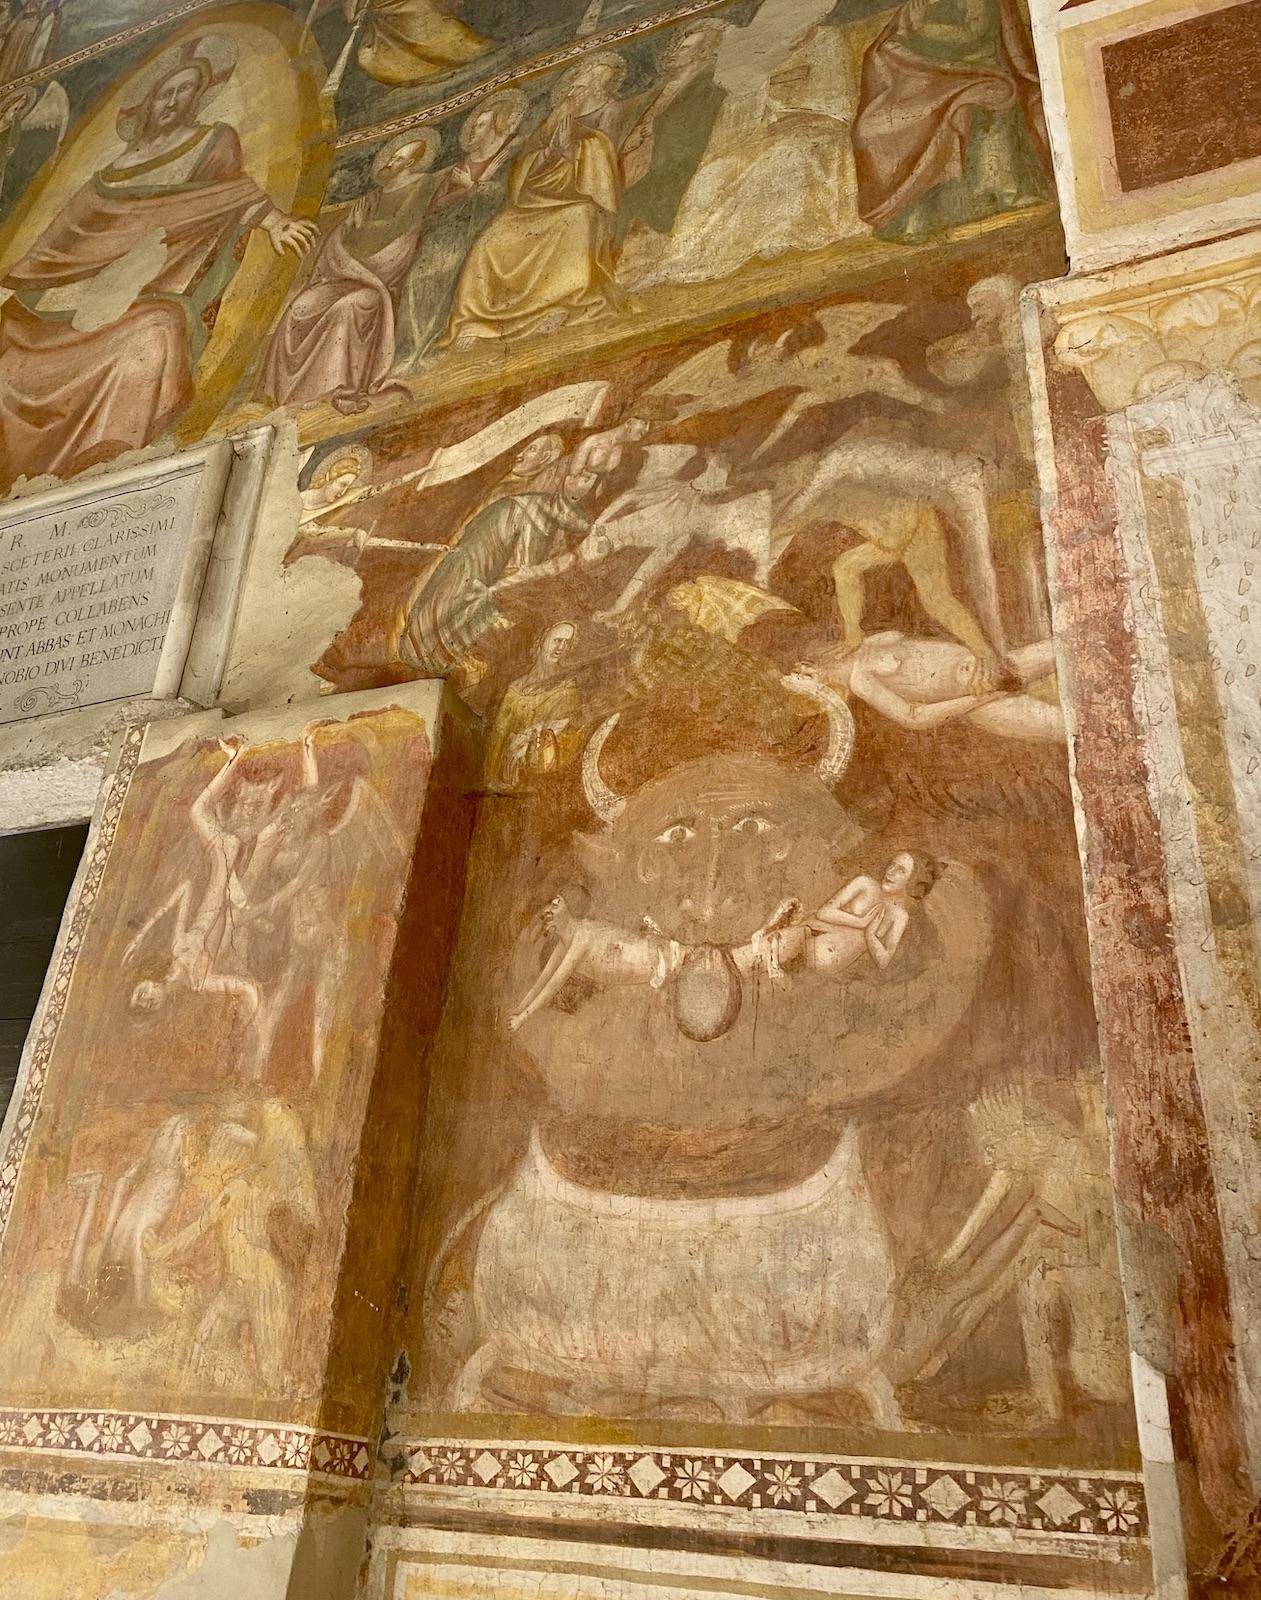 The Romanesque Abbey of Pomposa in Codigoro, Ferrara, provides us with some of the most frightening examples. 